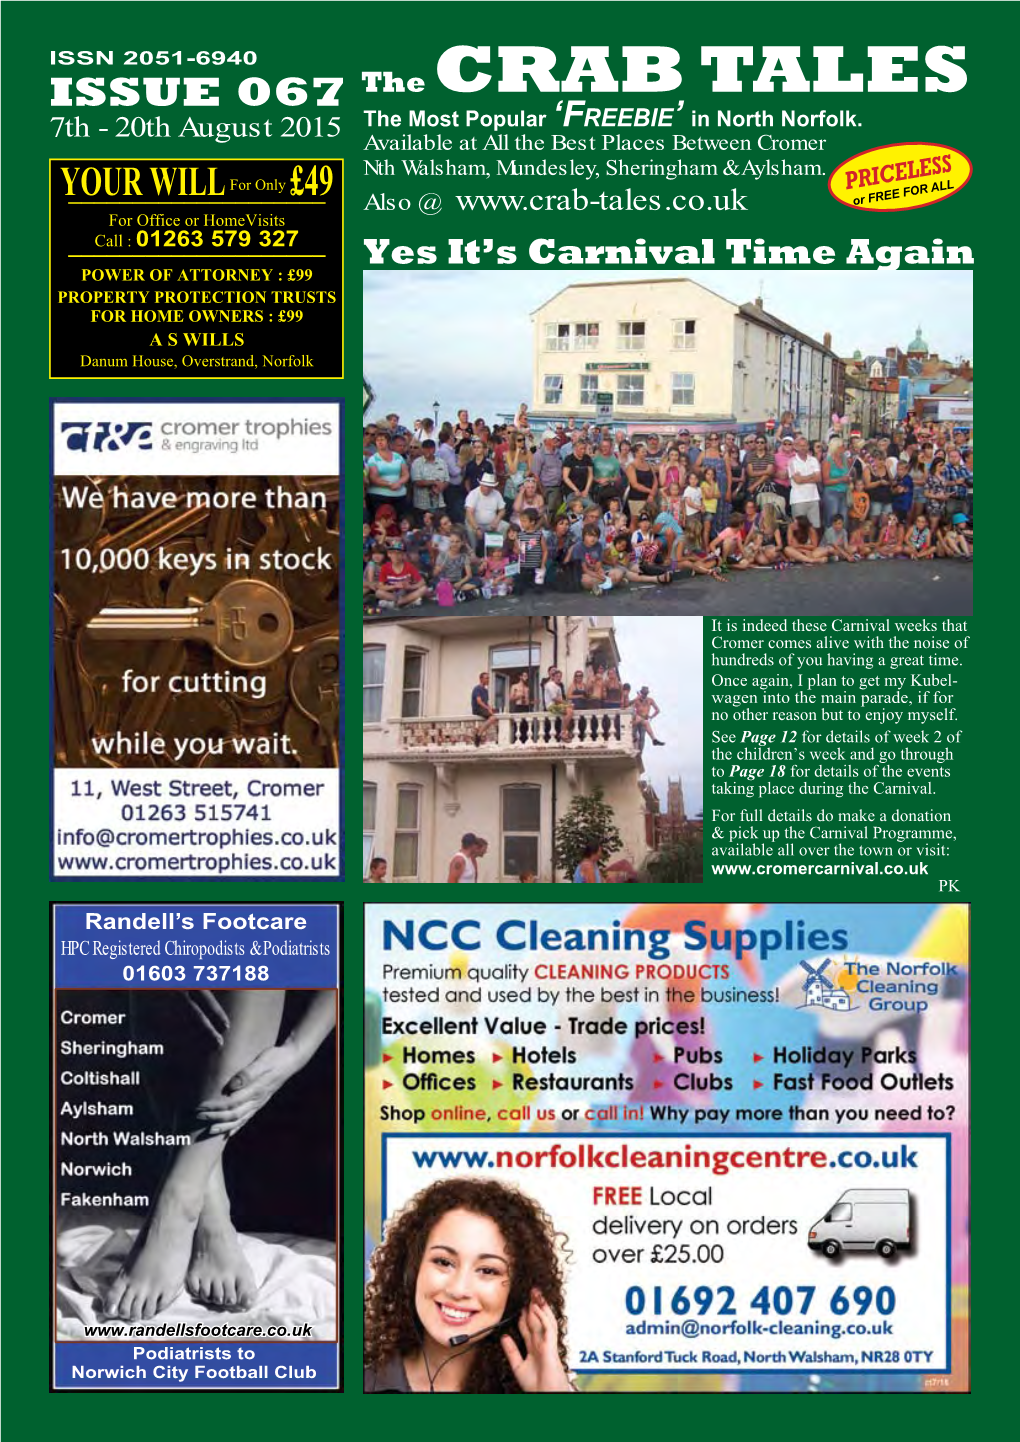 The CRAB TALES 7Th - 20Th August 2015 the Most Popular ‘Fr E E B I E ’ in North Norfolk